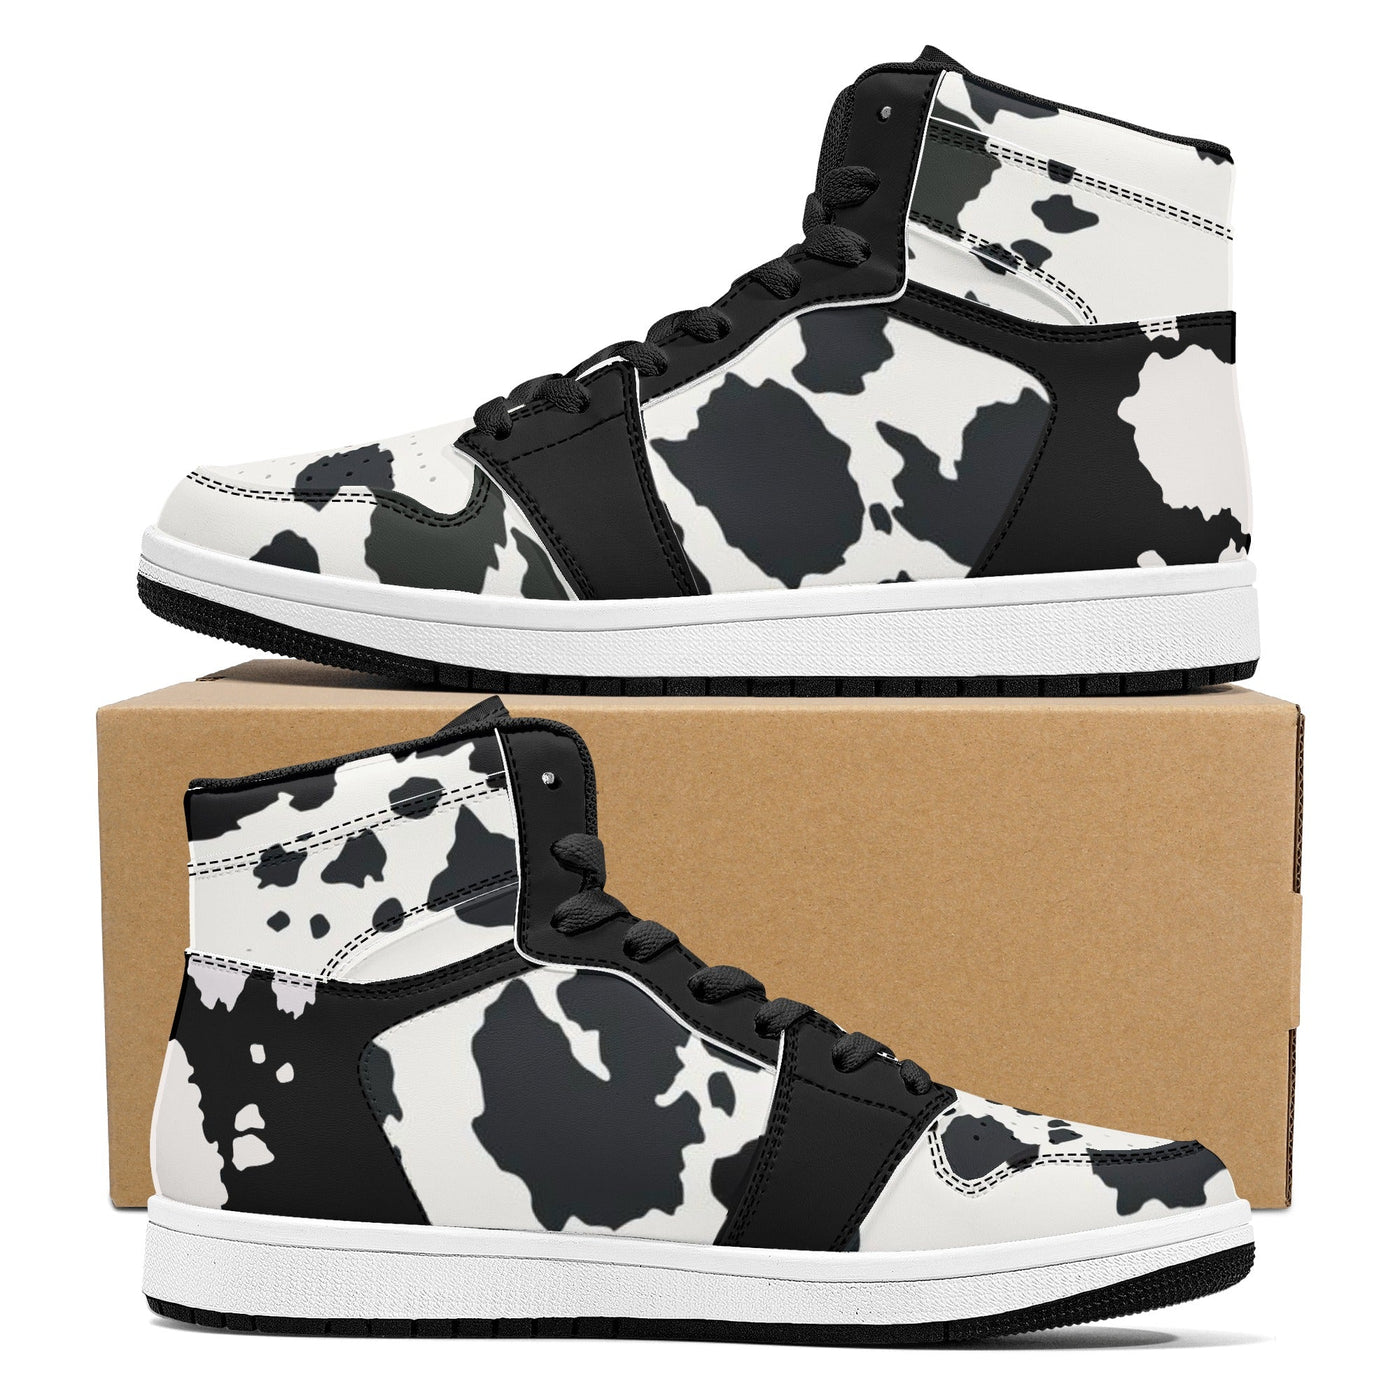 Moo-licious Cow Print Sneakers High Top